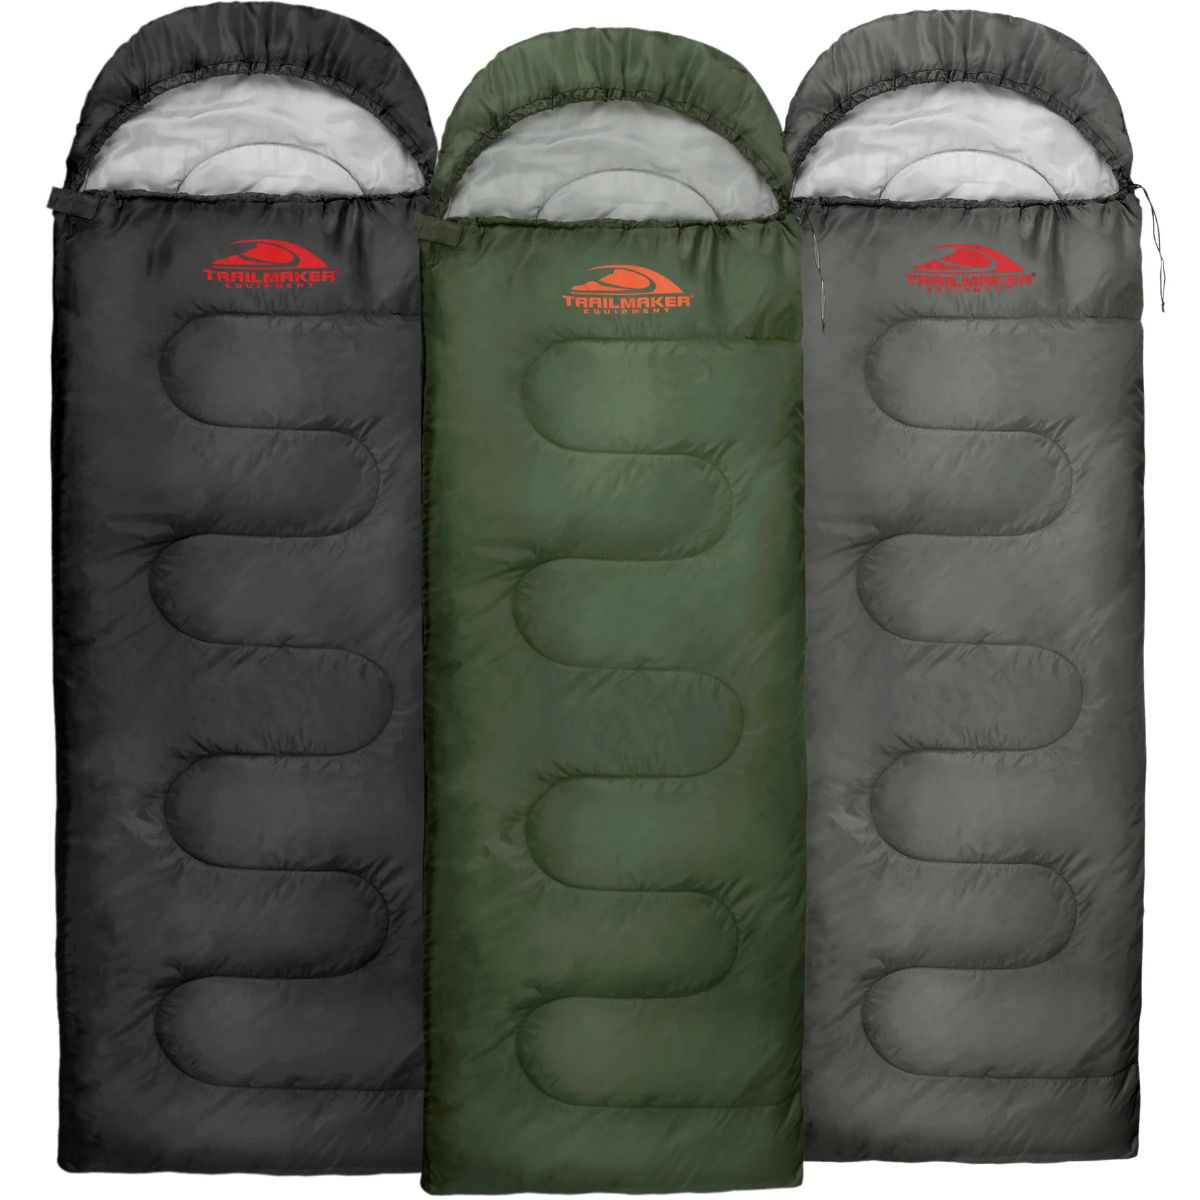 10 Pieces Waterproof Cold Weather Sleeping Bags - 30f Assorted Colors - Sleep Gear